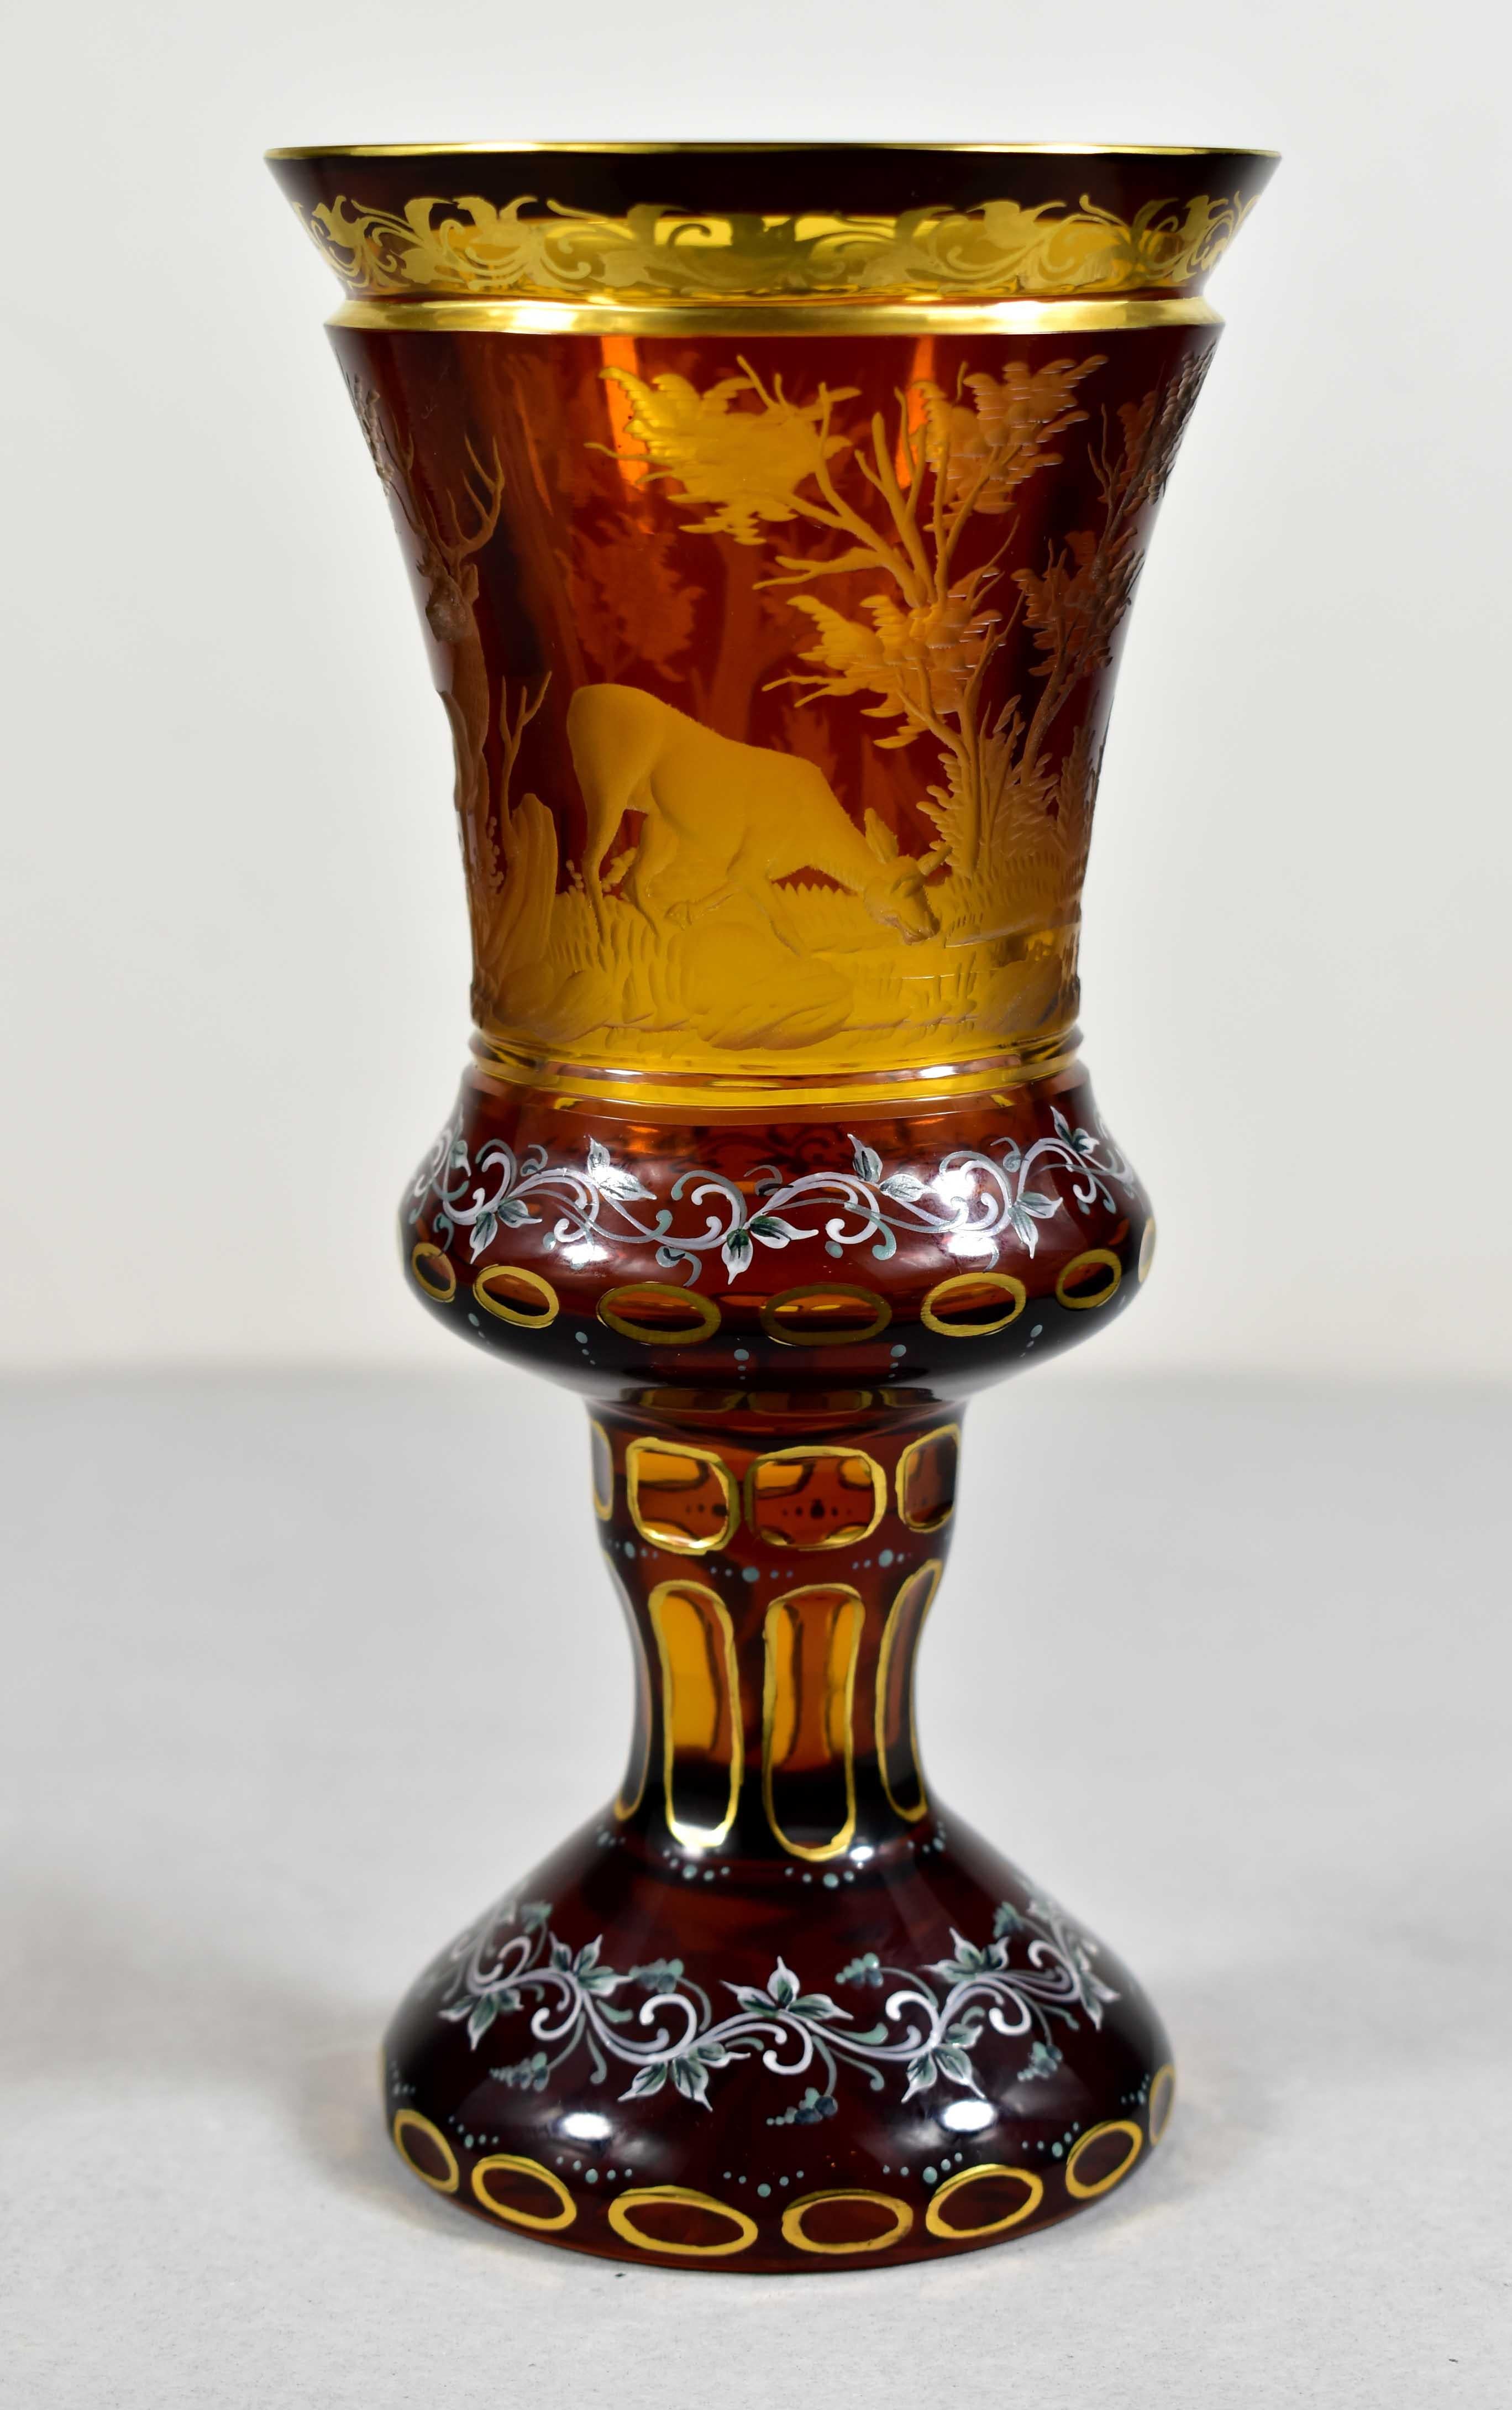 Hand-Crafted Amber Glass Goblet- Hunting motif - Bohemian Glass - 19-20 century